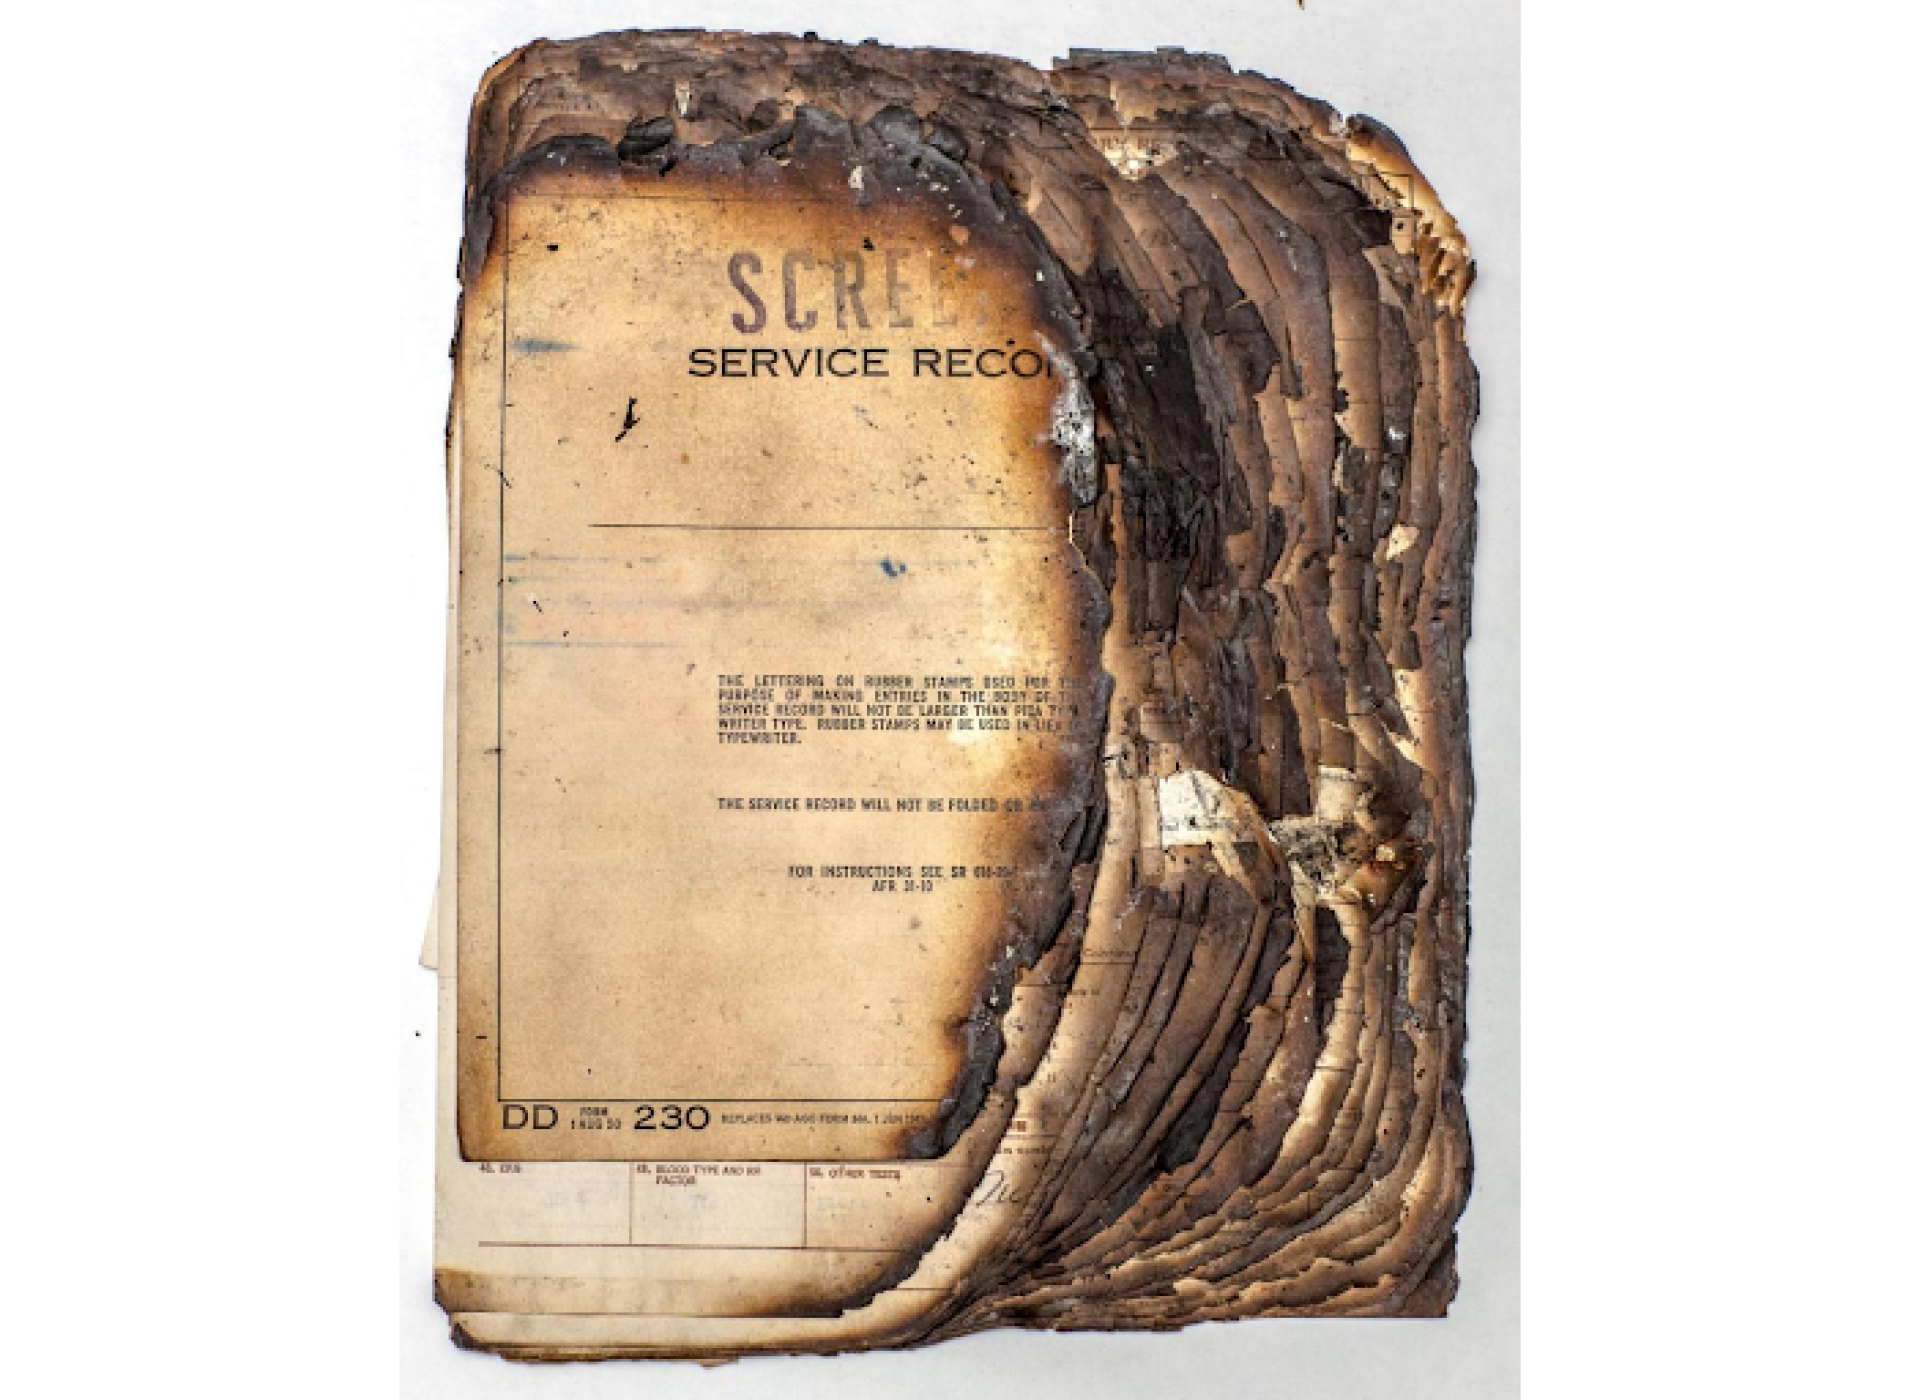 The remains of a veteran’s official military personnel file that was partially burned in the 1973 National Personnel Records Center fire. Courtesy of the National Archives and Records Administration.